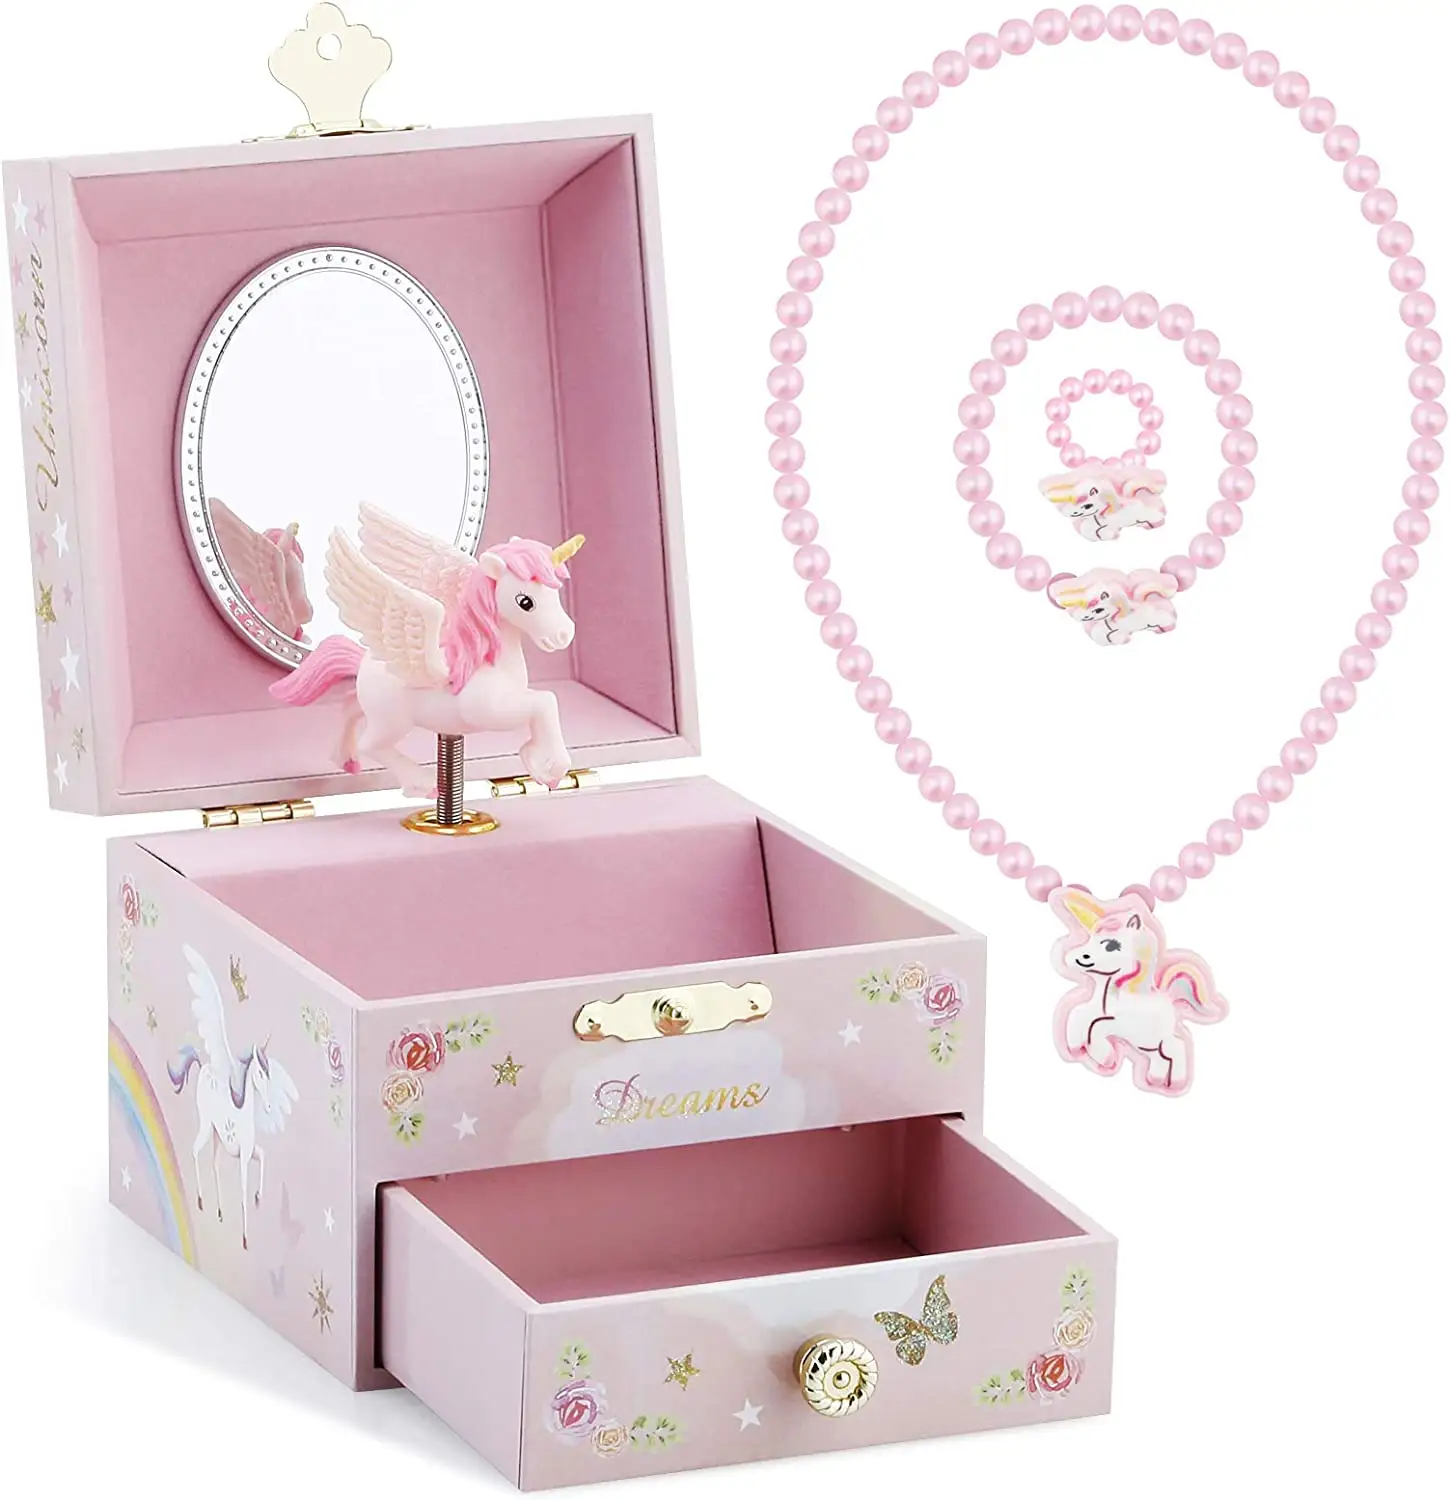 Kids Custom Ballet Musical Jewelry Box for Girls with Drawer and Jewelry Set with Mysterious Unicorn